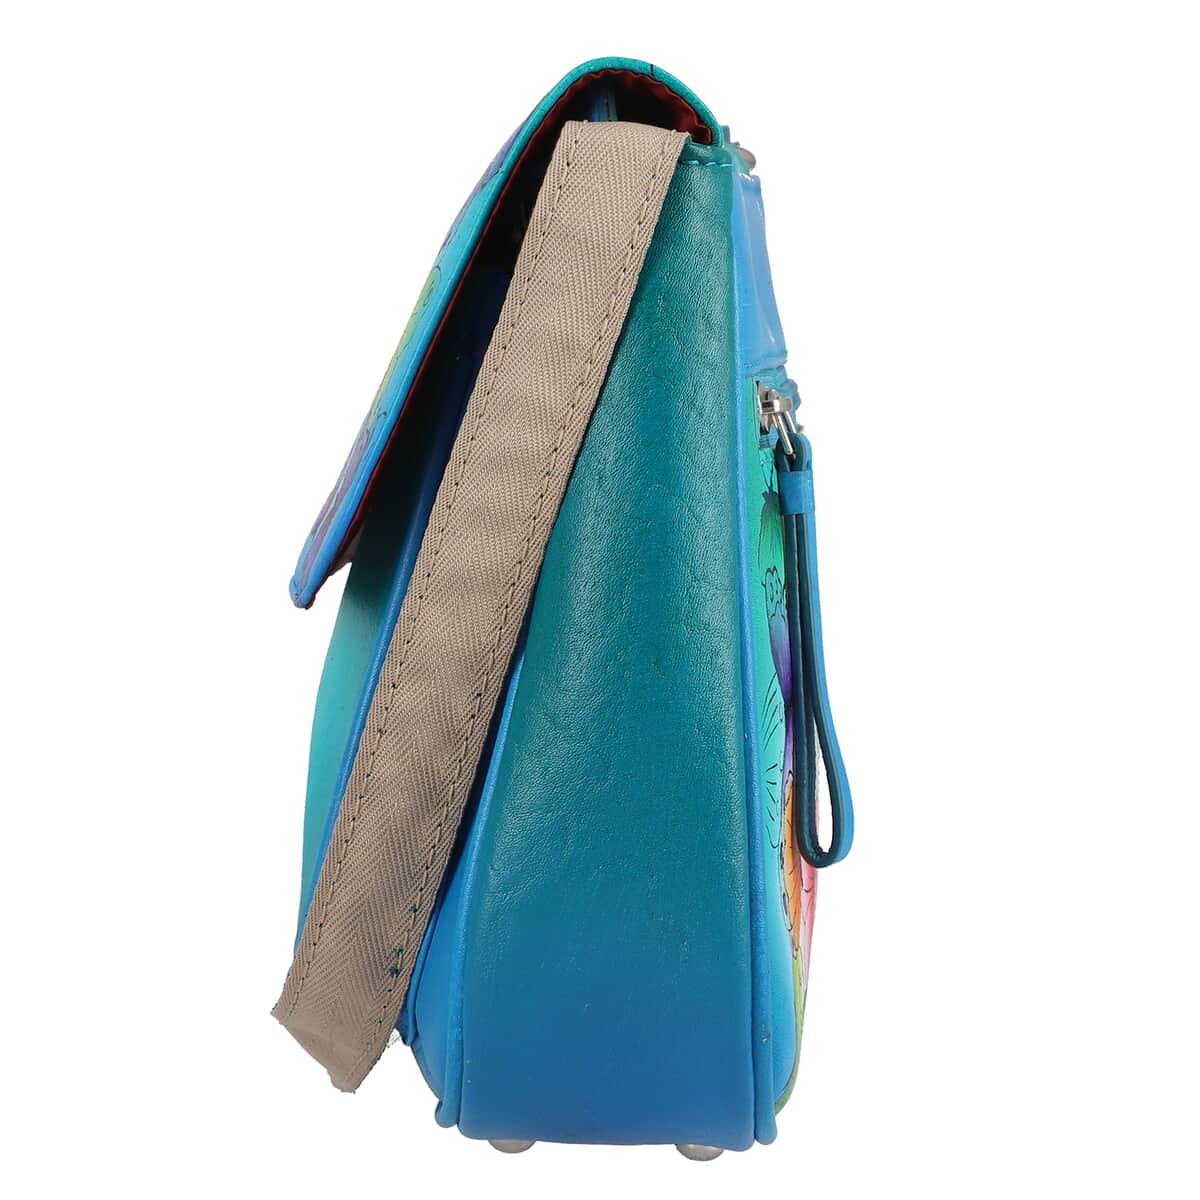 "SUKRITI 100% Genuine Leather Crossbody Bag Theme: Butterfly Color: Blue Size: 10 x 3 x 7 inches" image number 3